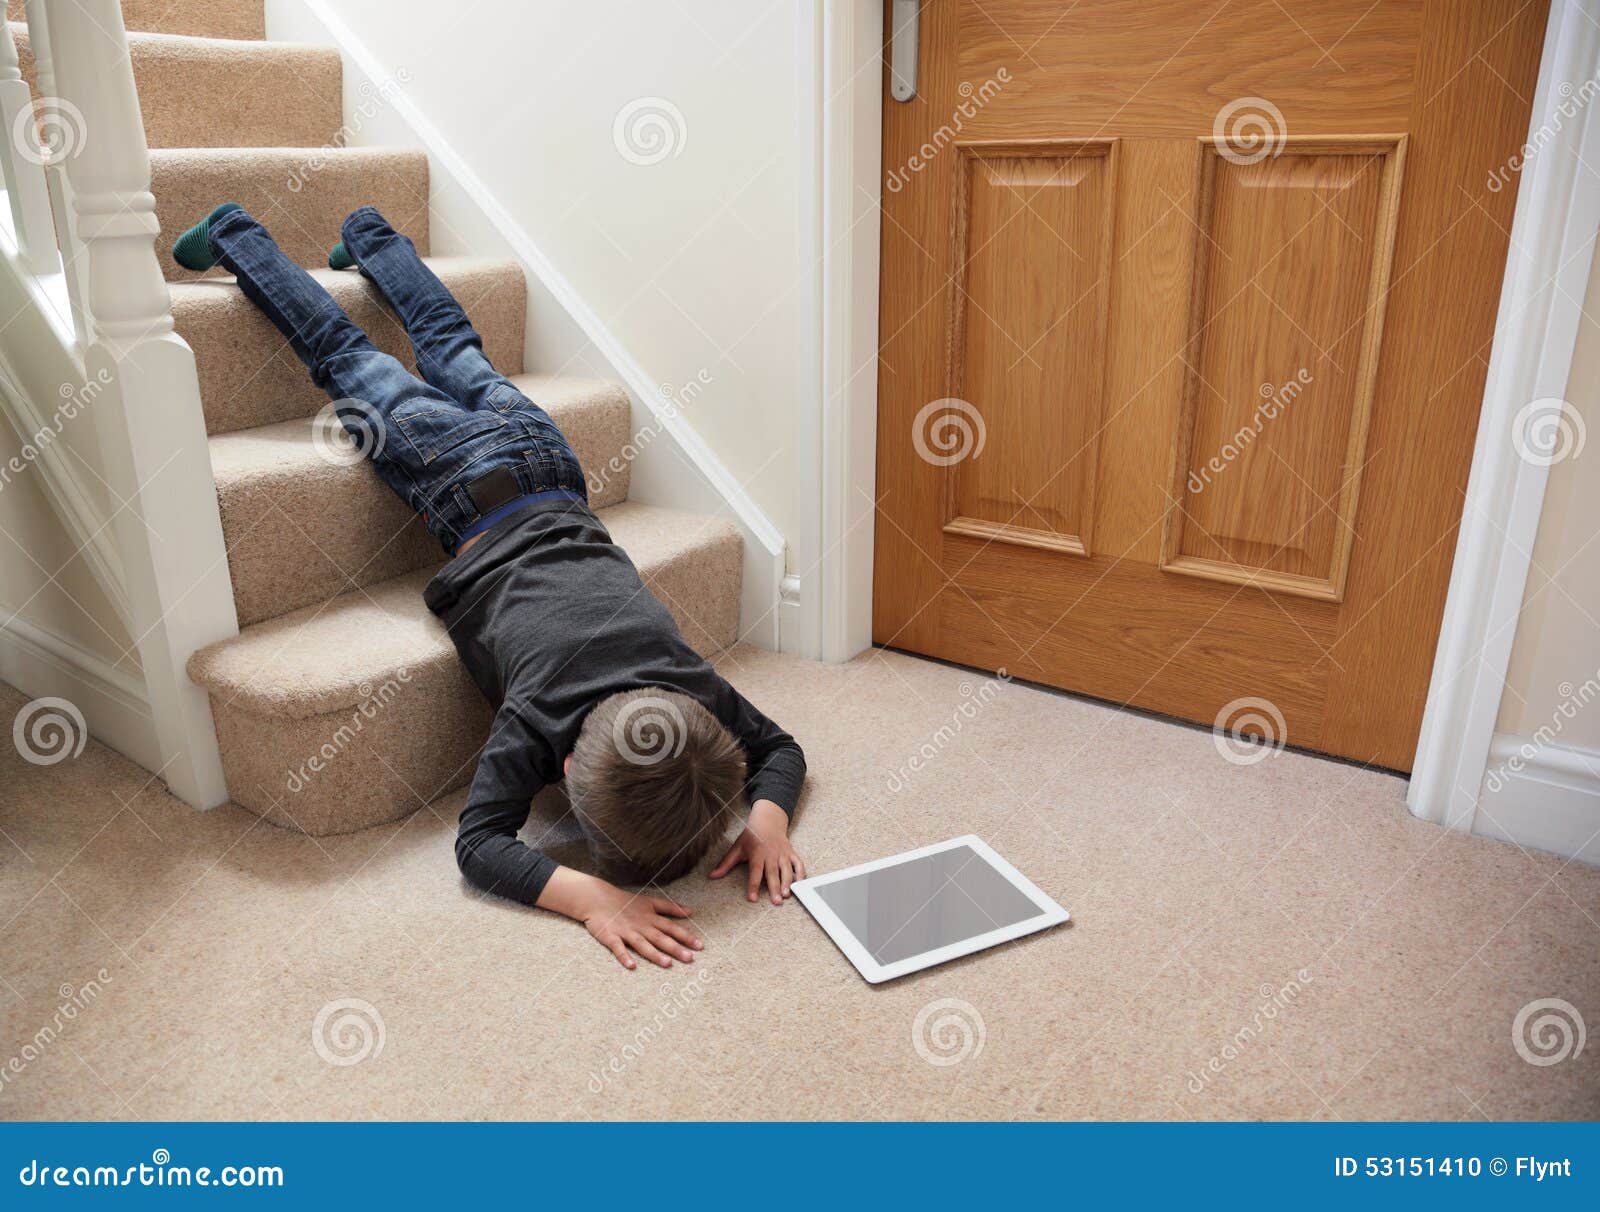 438 Falling Down Stairs Photos - Free &amp; Royalty-Free Stock Photos from  Dreamstime